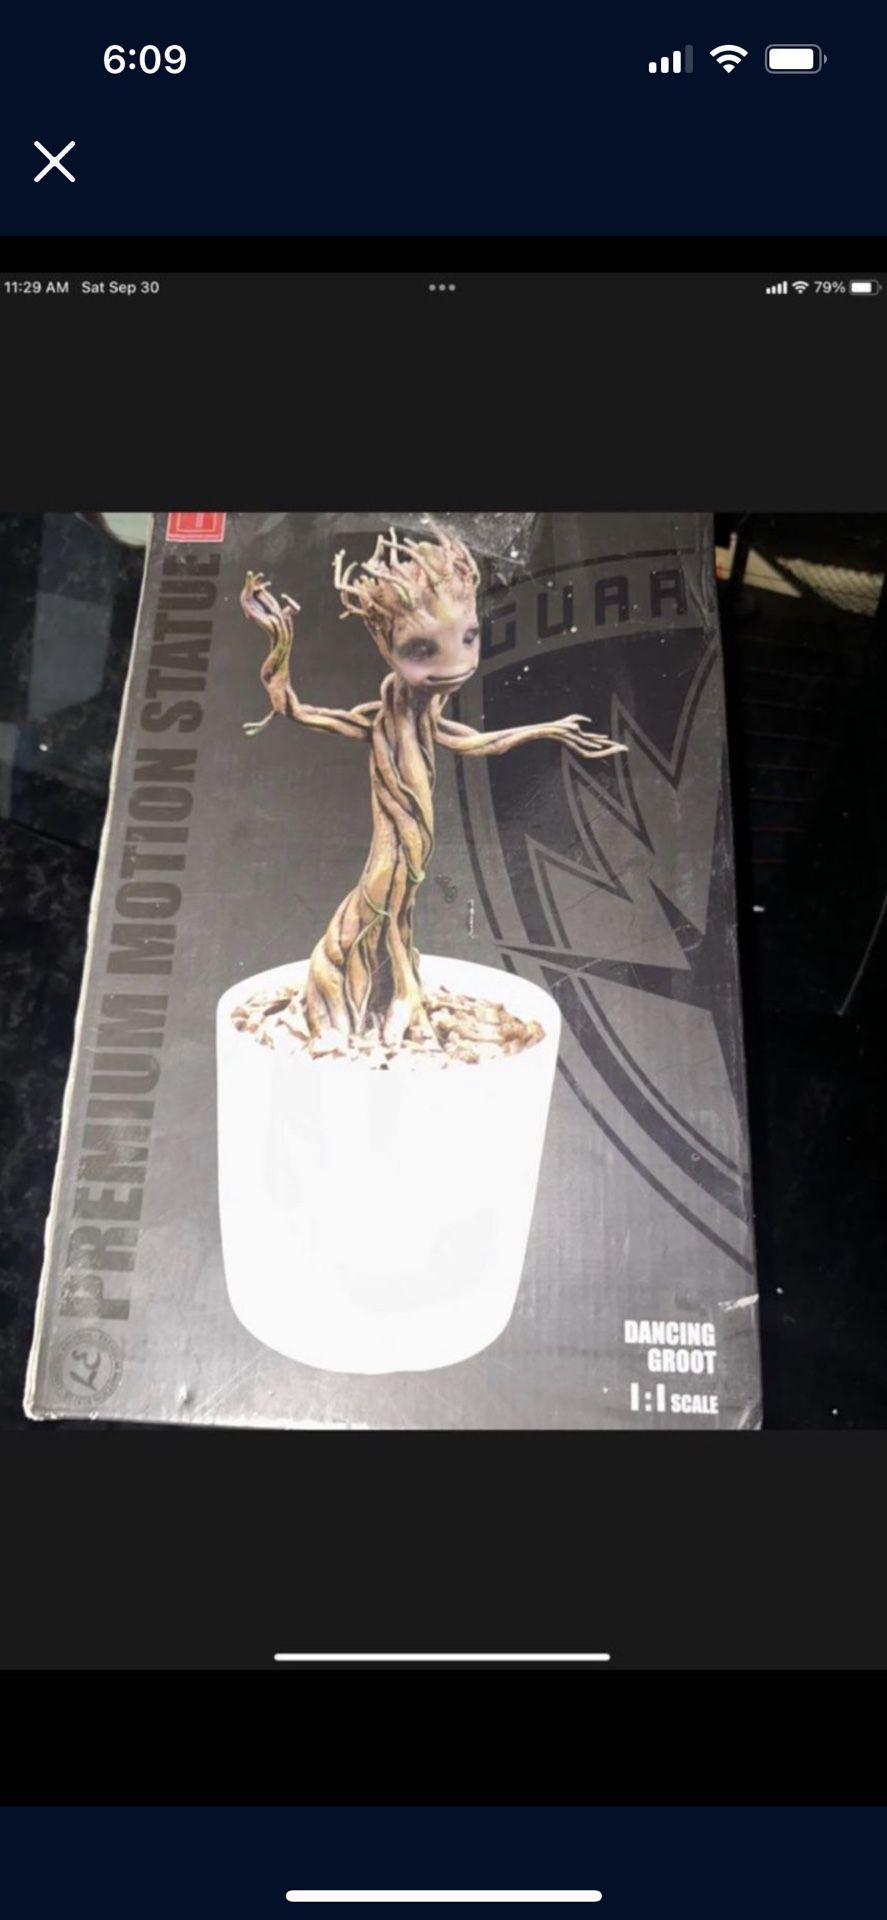 Dancing Groot 1:1 Scale, Marvel Guardians Of The Galaxy, Factory Entertainment